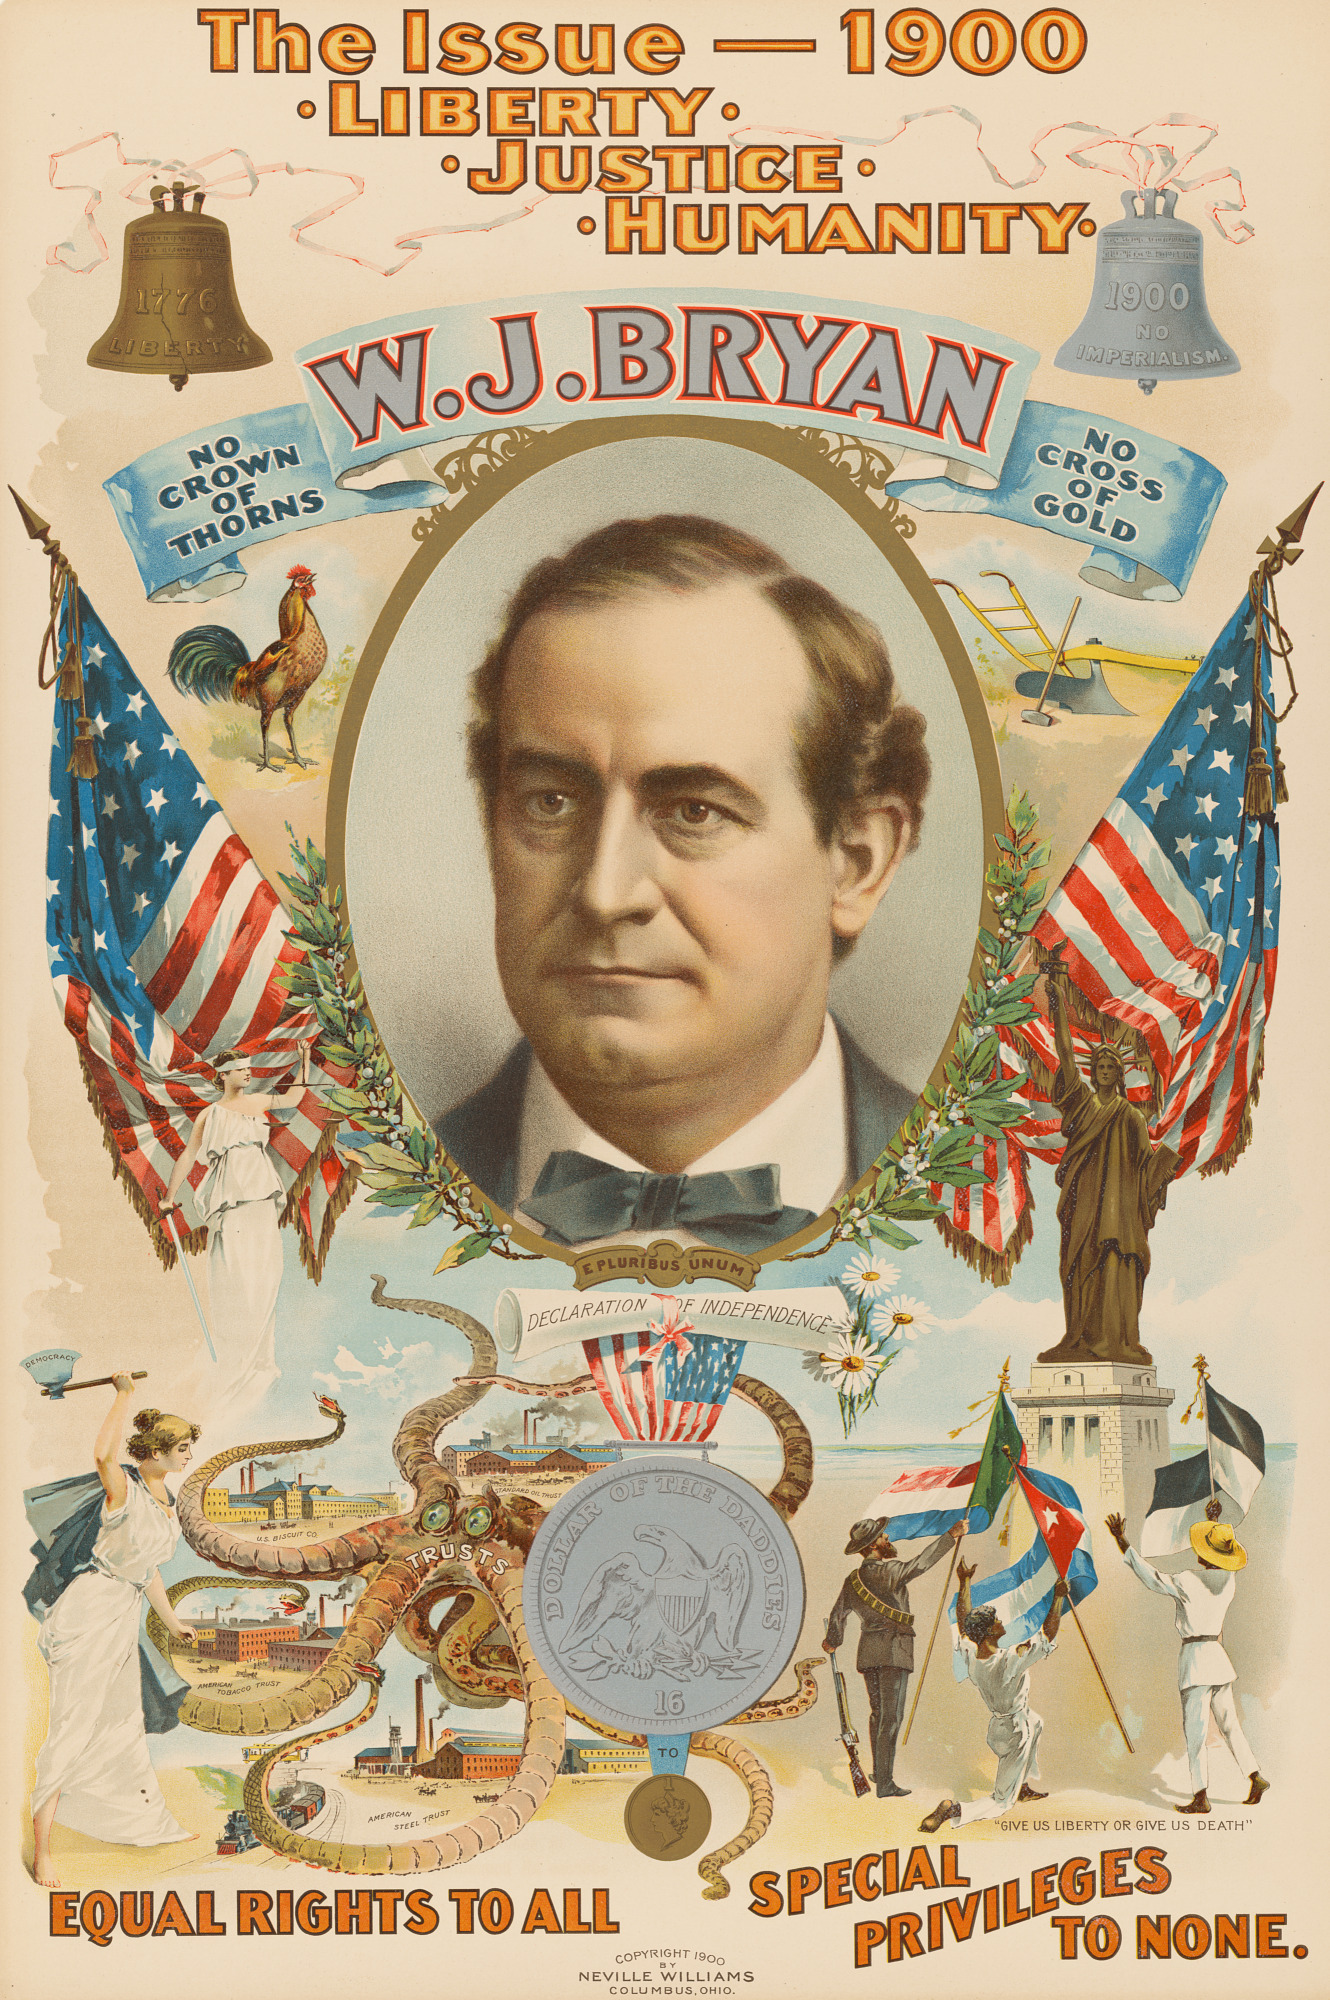 Peoples Party and William Jennings Bryan